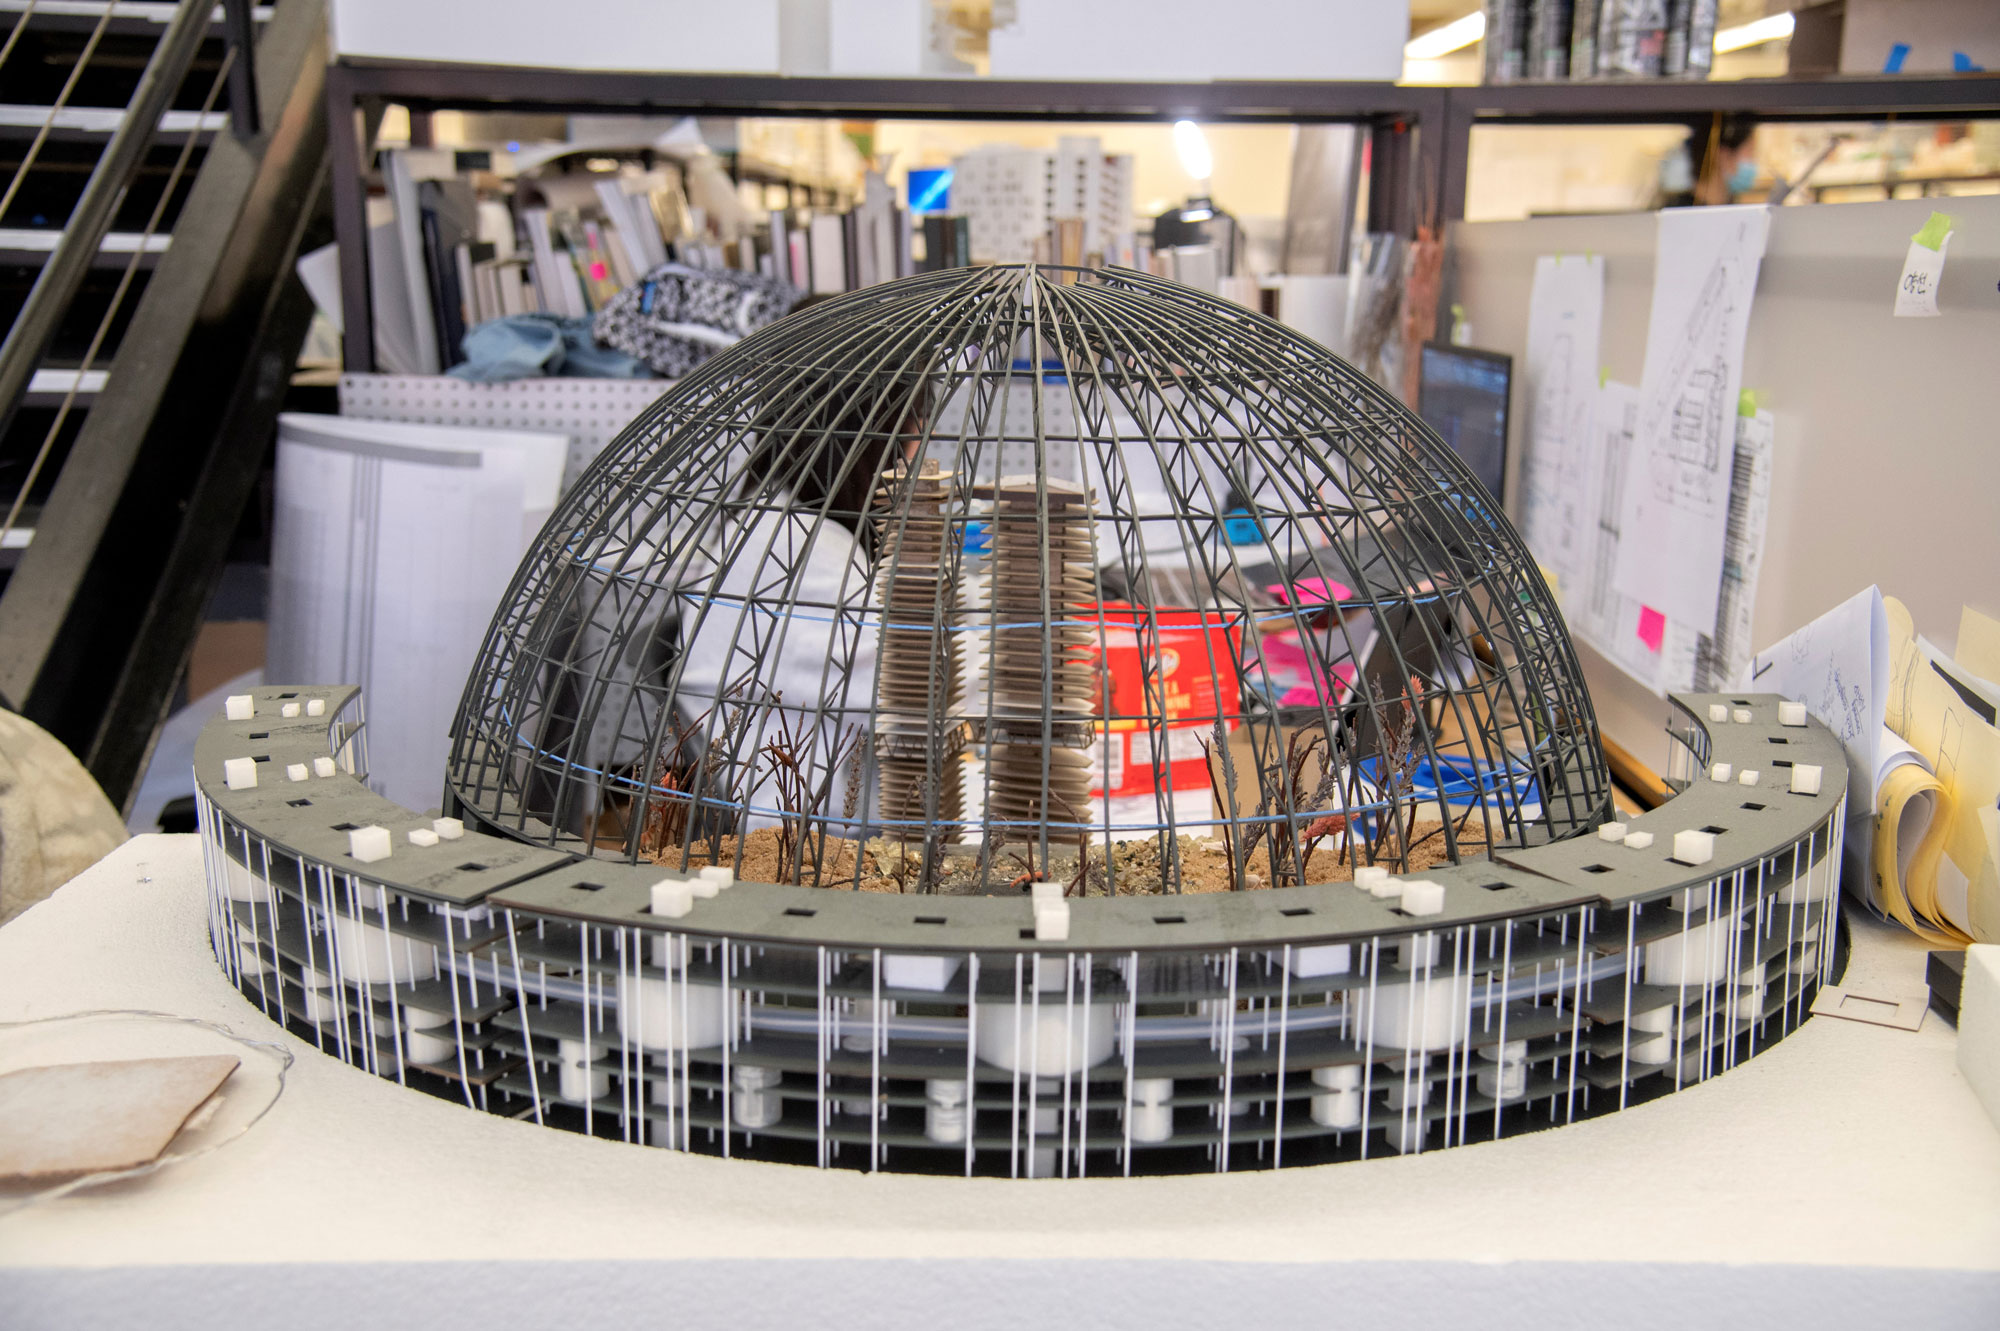 Image of student work in dome shape